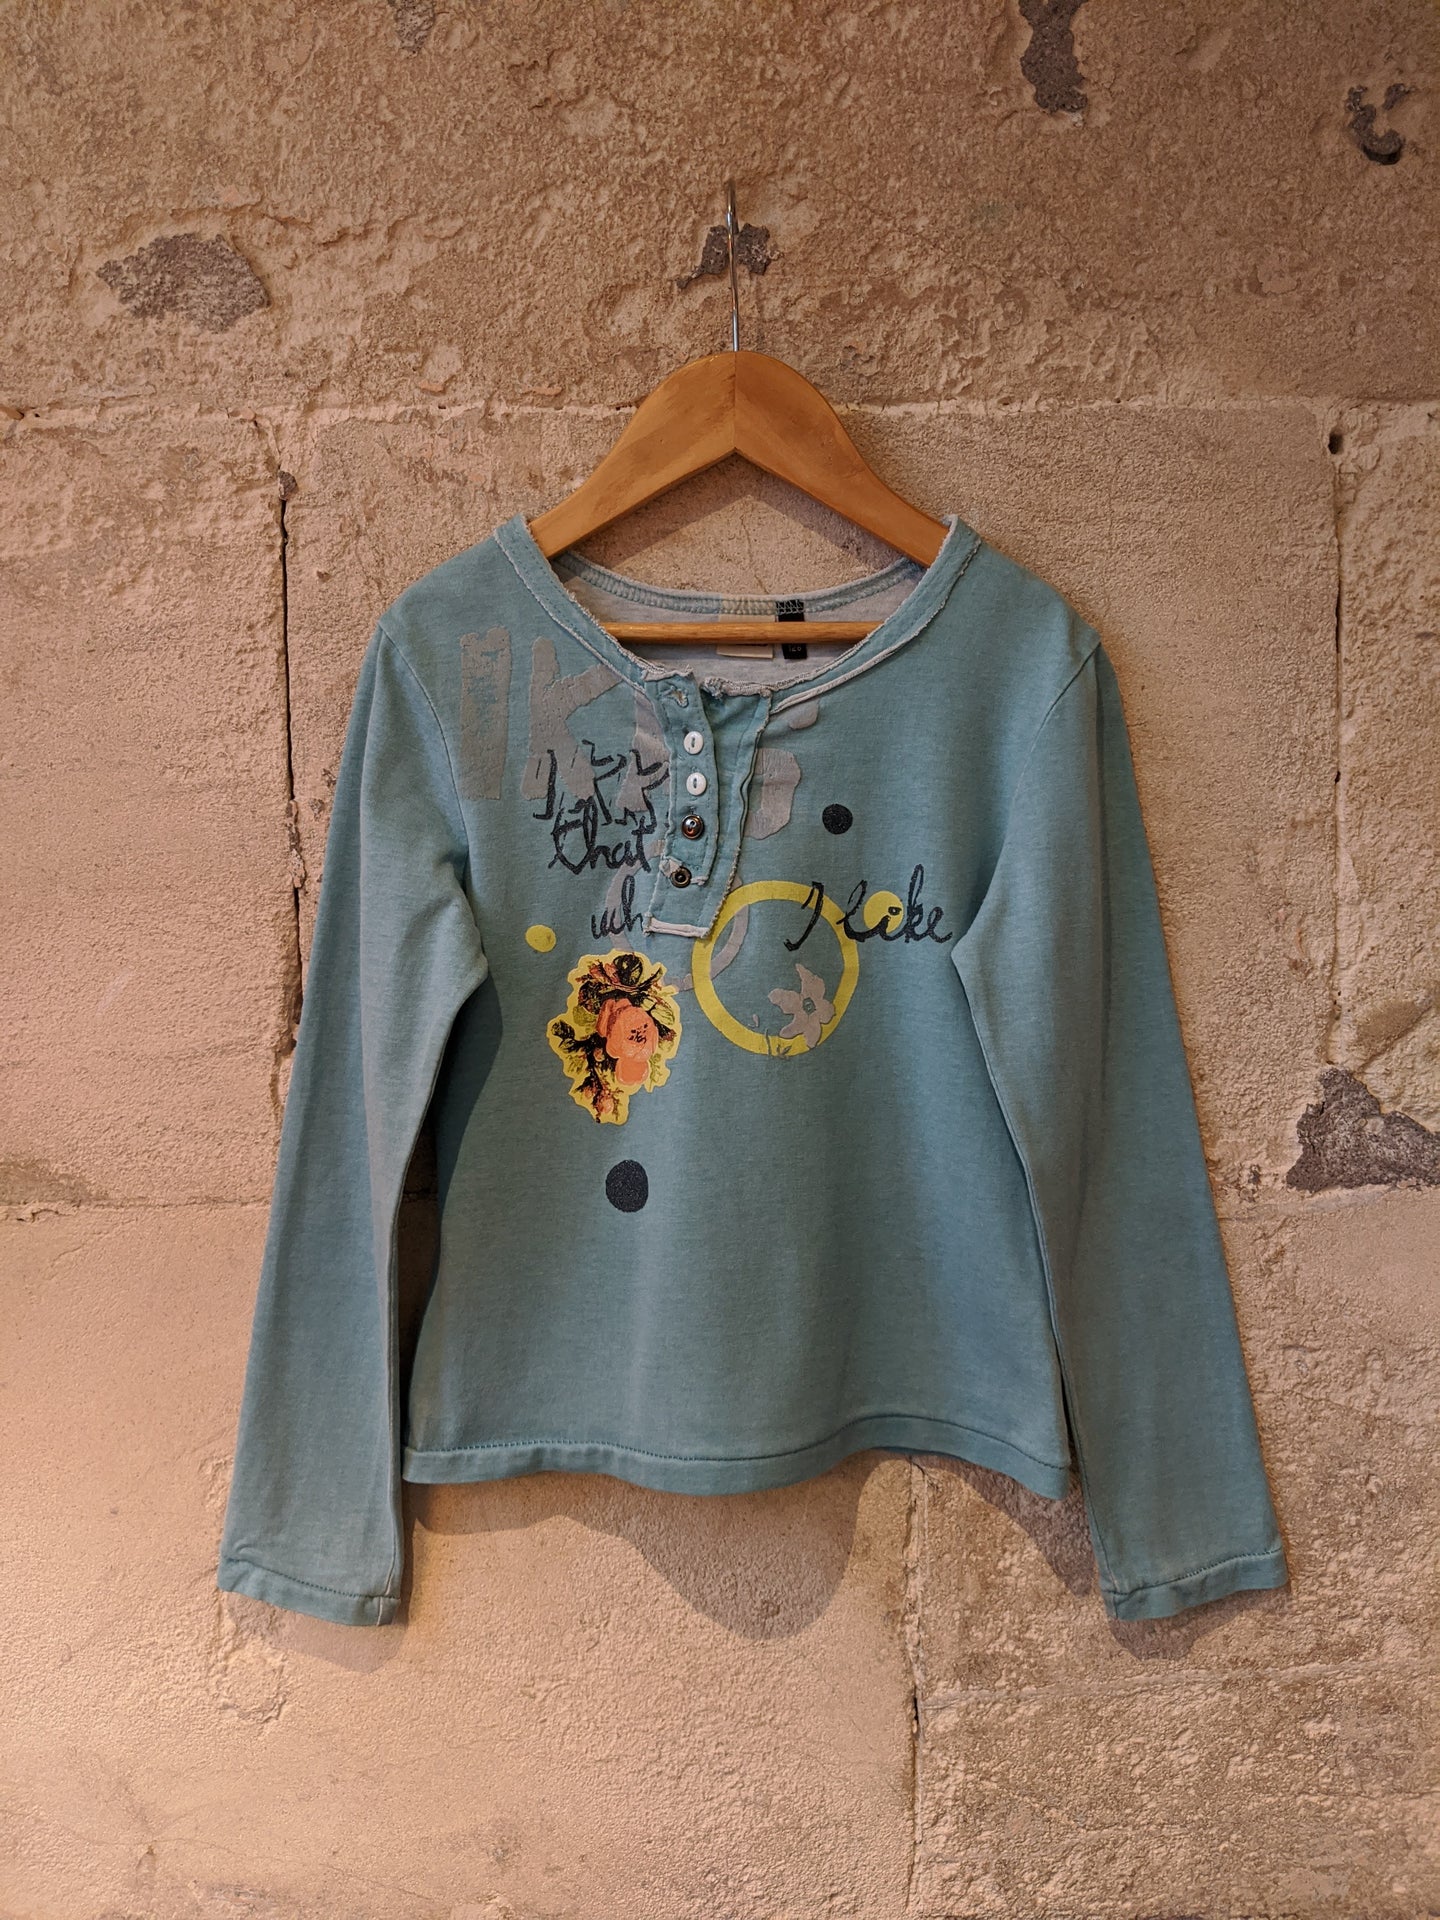 IKKS Sea Green Sparkly Top - 7 Years